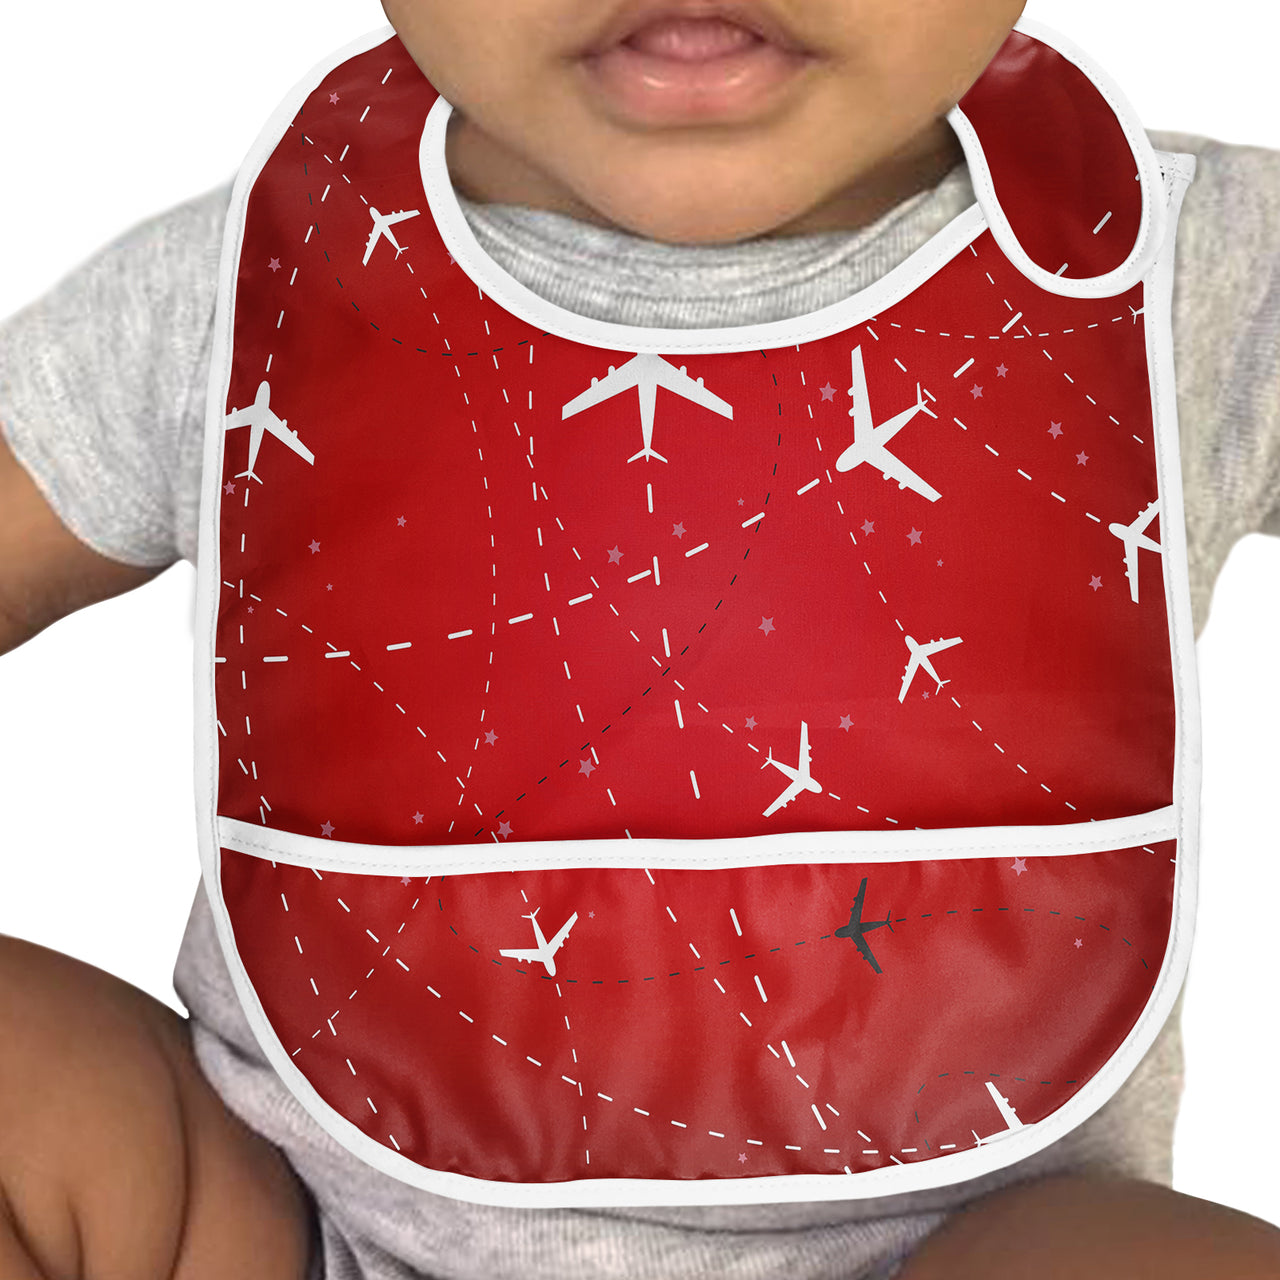 Travelling with Aircraft (Red) Designed Baby Bib